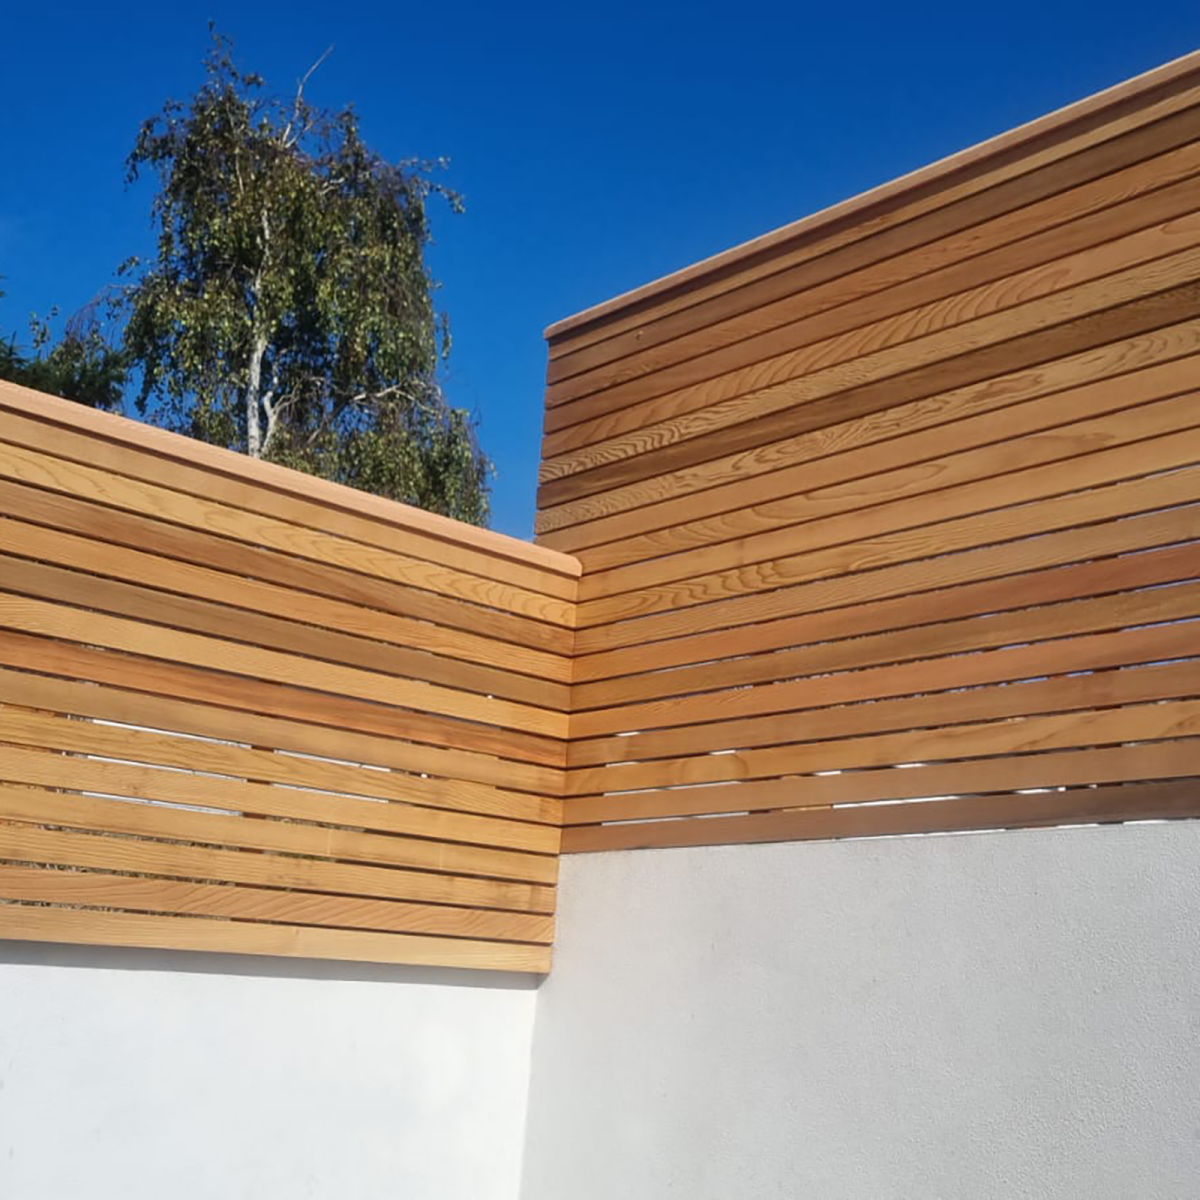 Two double sided fence panels sitting next to each other at different heights.